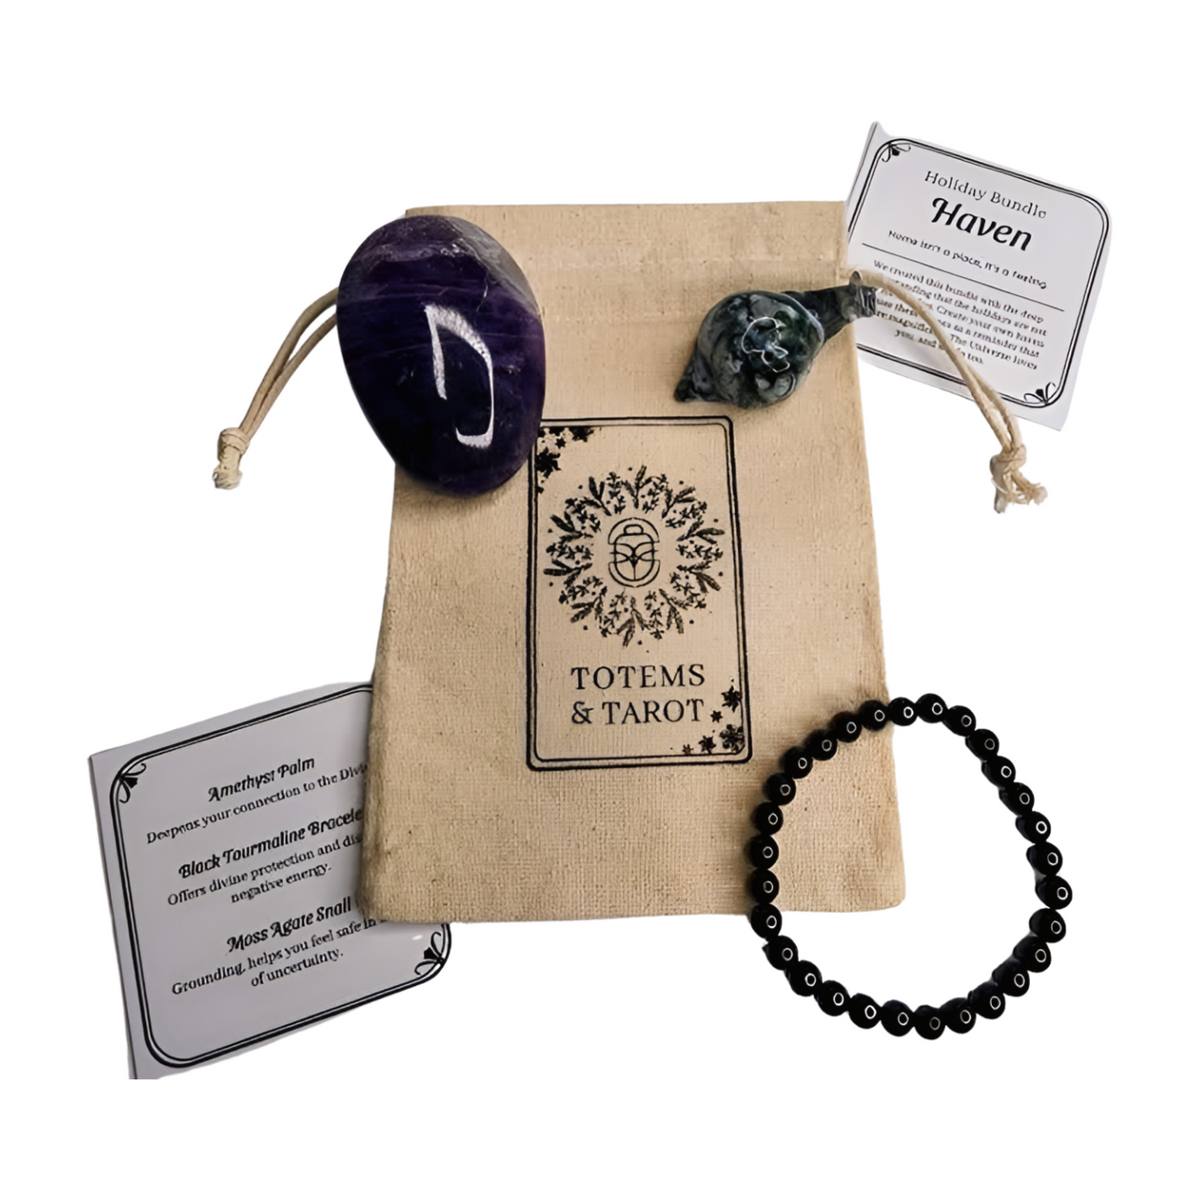 Haven Crystal Bundle: Finding Home Within